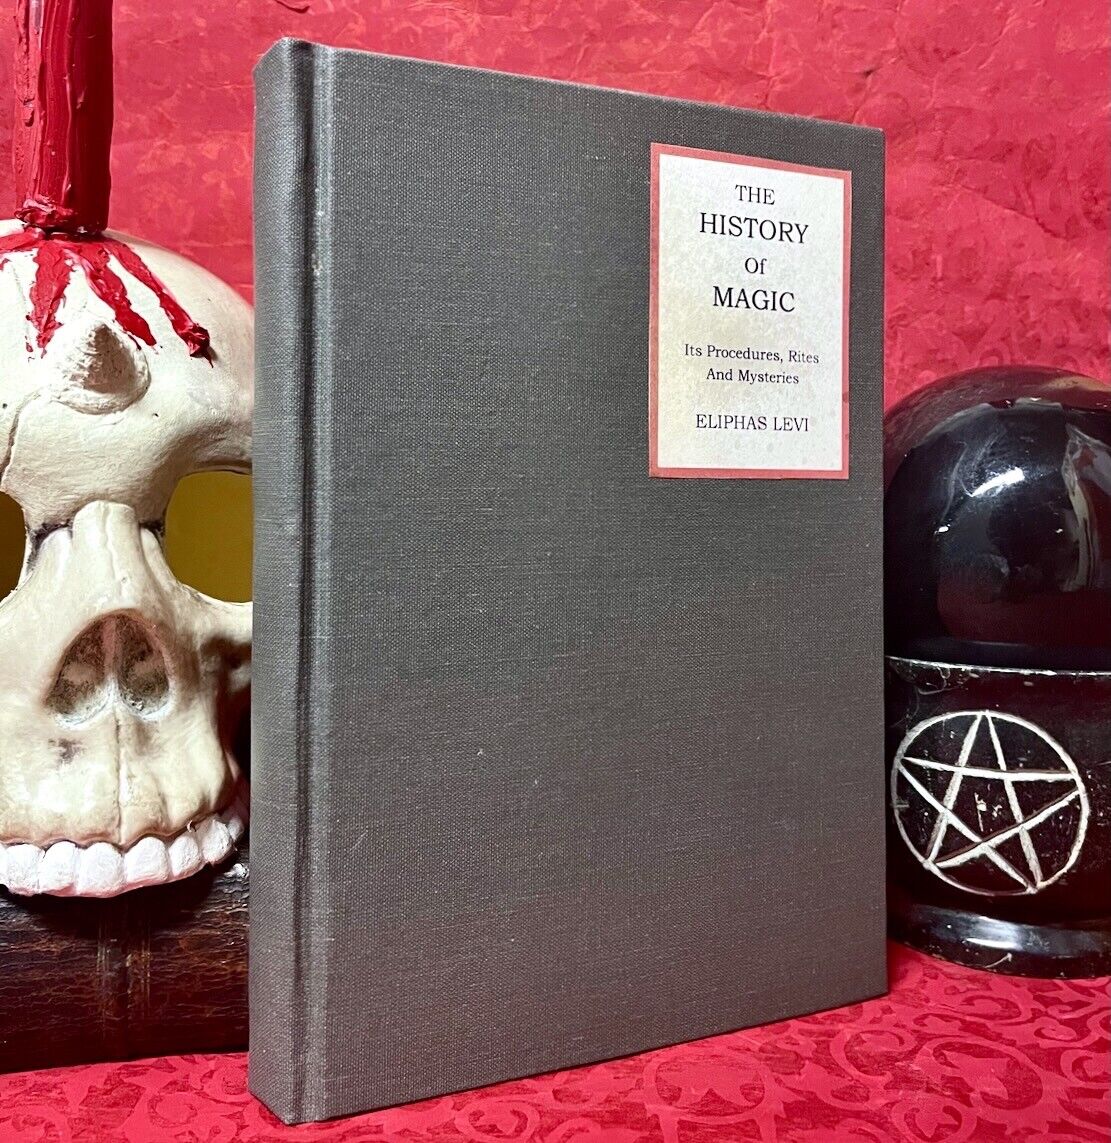 ELIPHAS LEVI / A E WAITE: THE HISTORY OF MAGIC HAND-BOUND REPRINT  OCCULT MAGICK